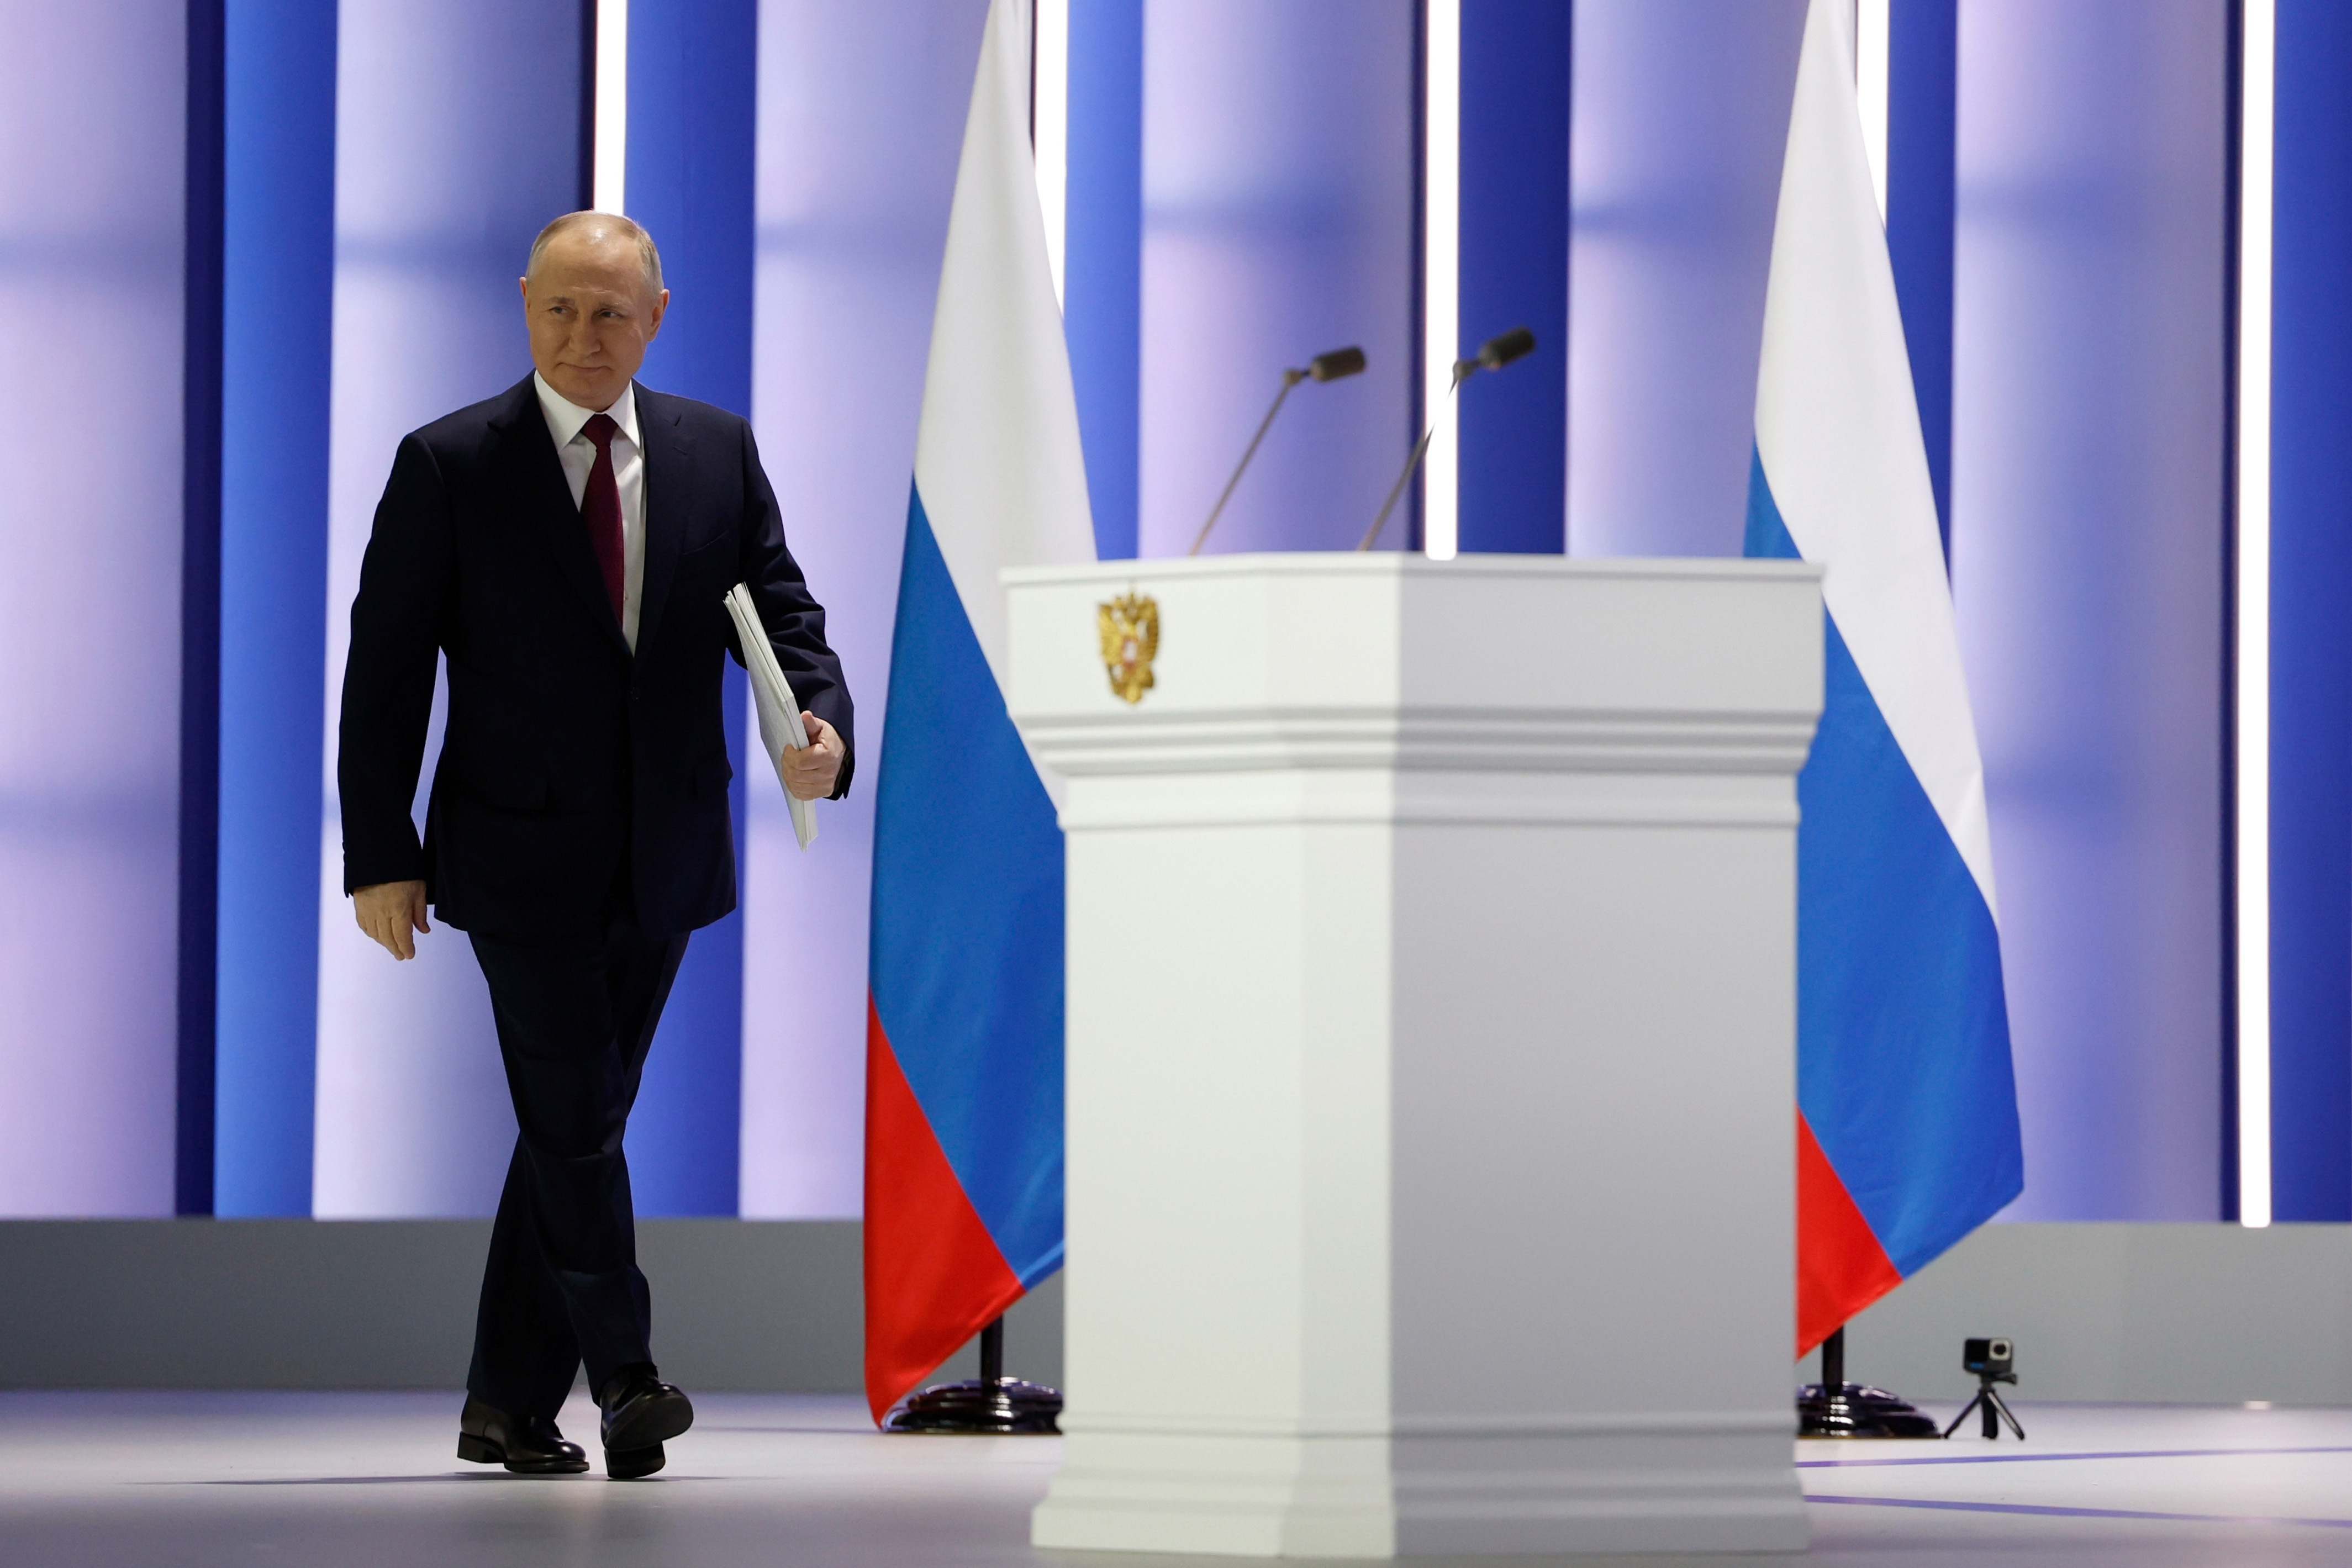 Russia's President Vladimir Putin arrives on stage for his annual state of the nation address, in Moscow, Russia, on February 21, 2023. (Dmitry Astakhov, Sputnik, Kremlin Pool Photo via AP)